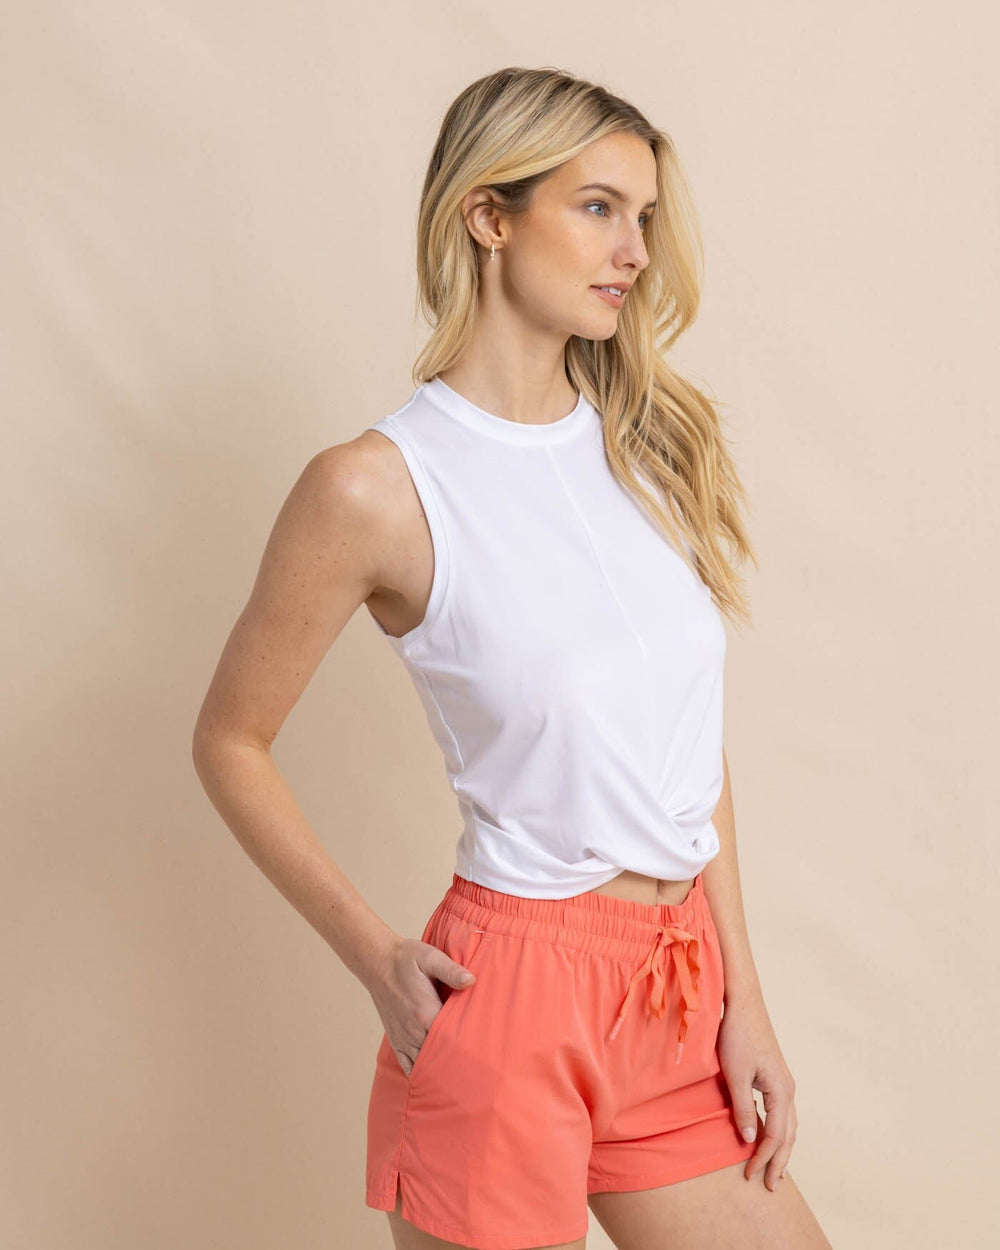 The front view of the Southern Tide Lacy Brrr-illiant Twist Top by Southern Tide - Classic White